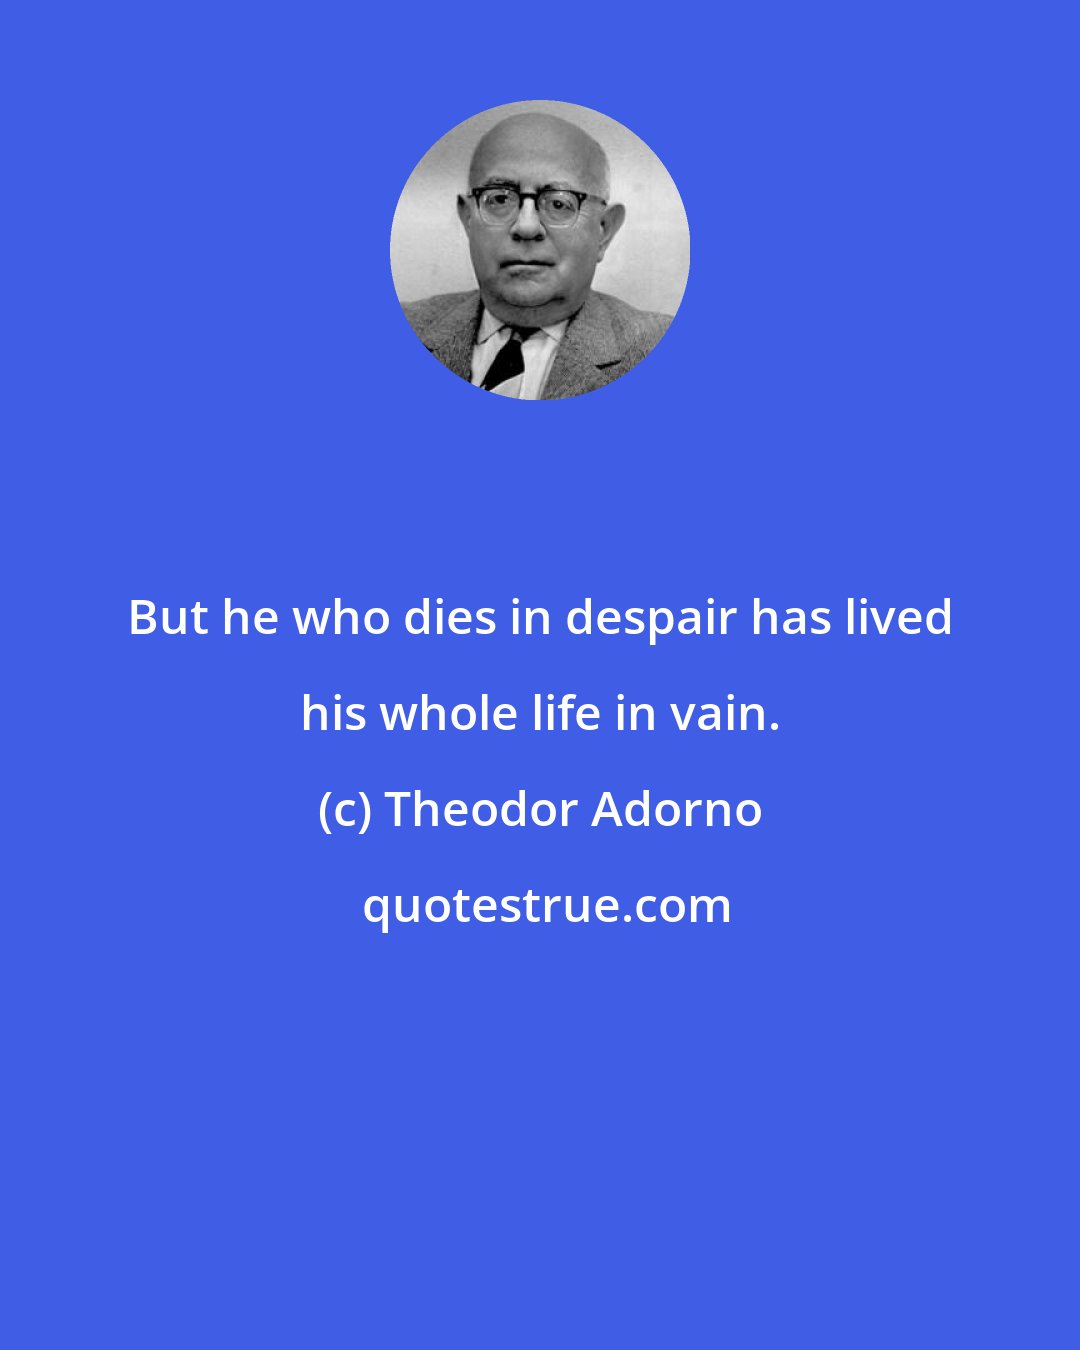 Theodor Adorno: But he who dies in despair has lived his whole life in vain.